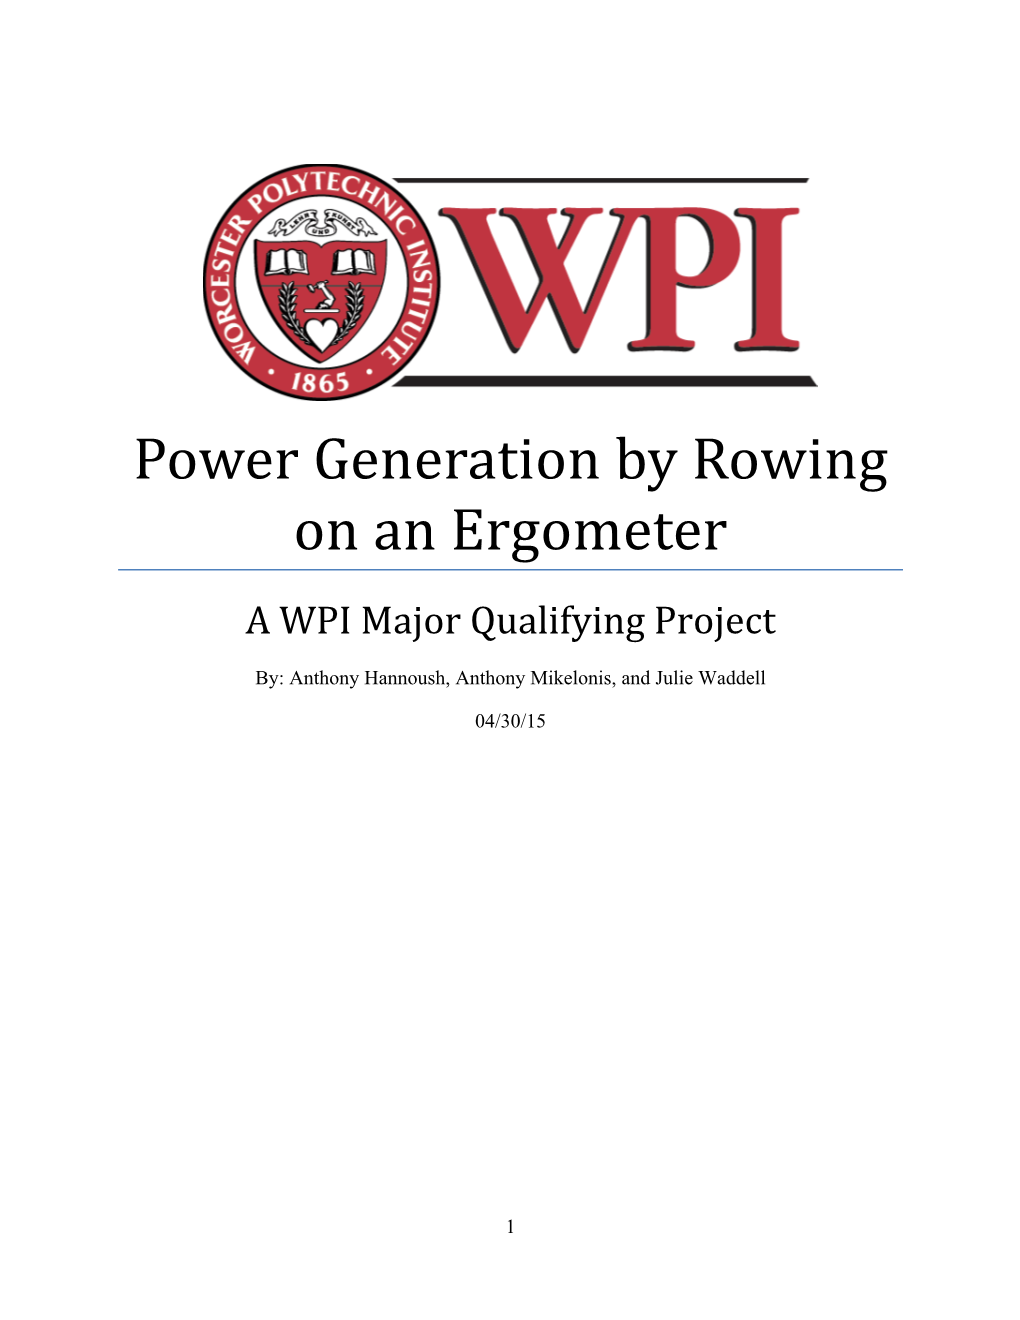 Power Generation by Rowing on an Ergometer a WPI Major Qualifying Project